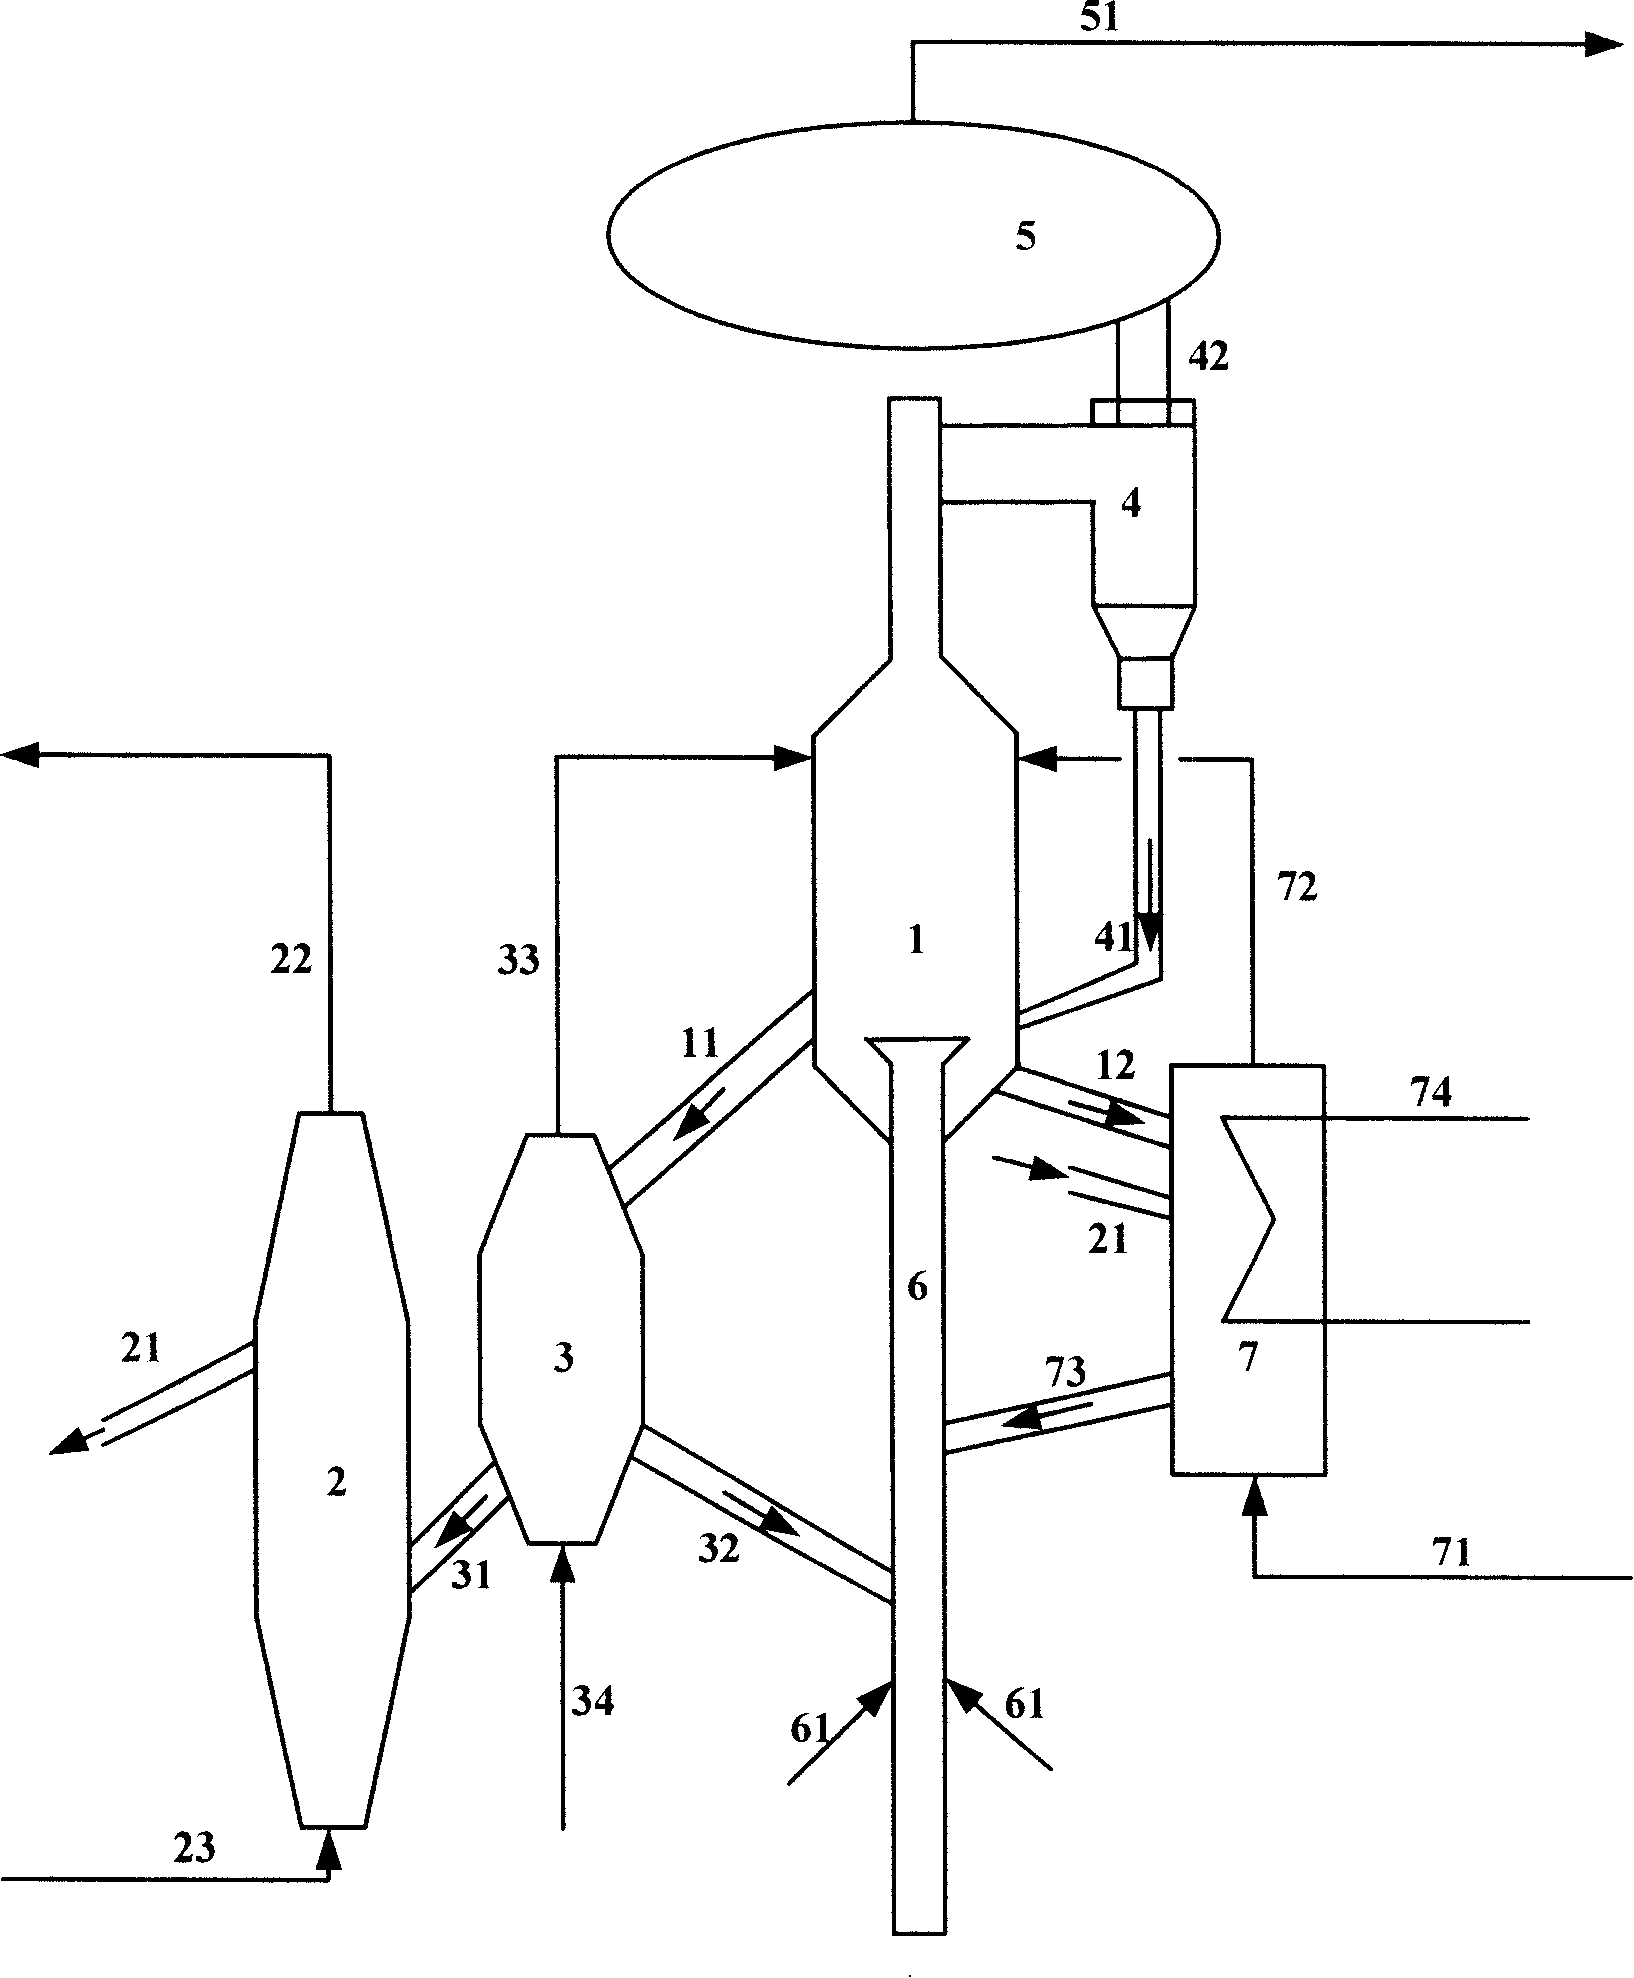 Method for producing dimethyl ether by fluidized catalytic gas-phase dehydration of methanol